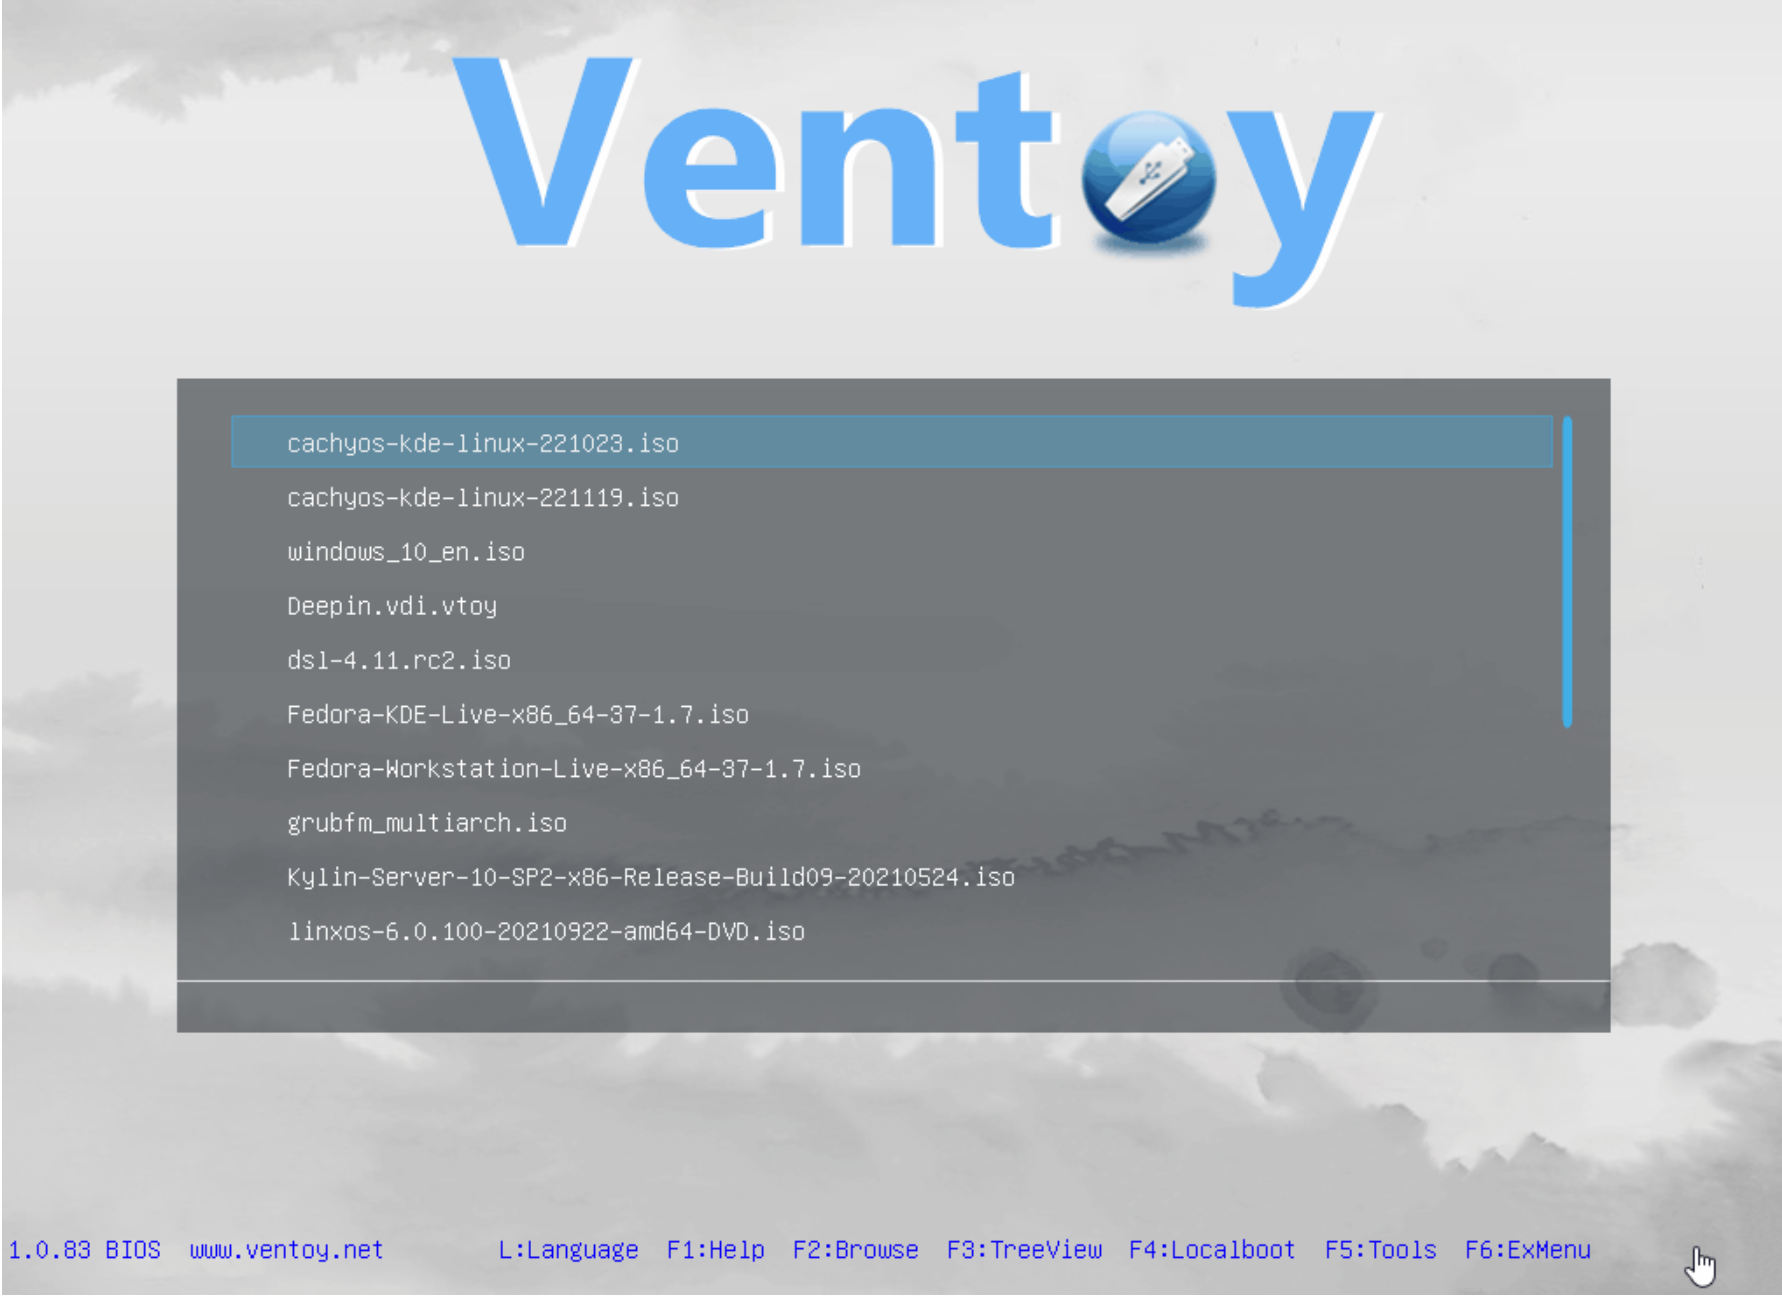 Multi-boot tool Ventoy adds support for 32GB Fat32 and multi-languages